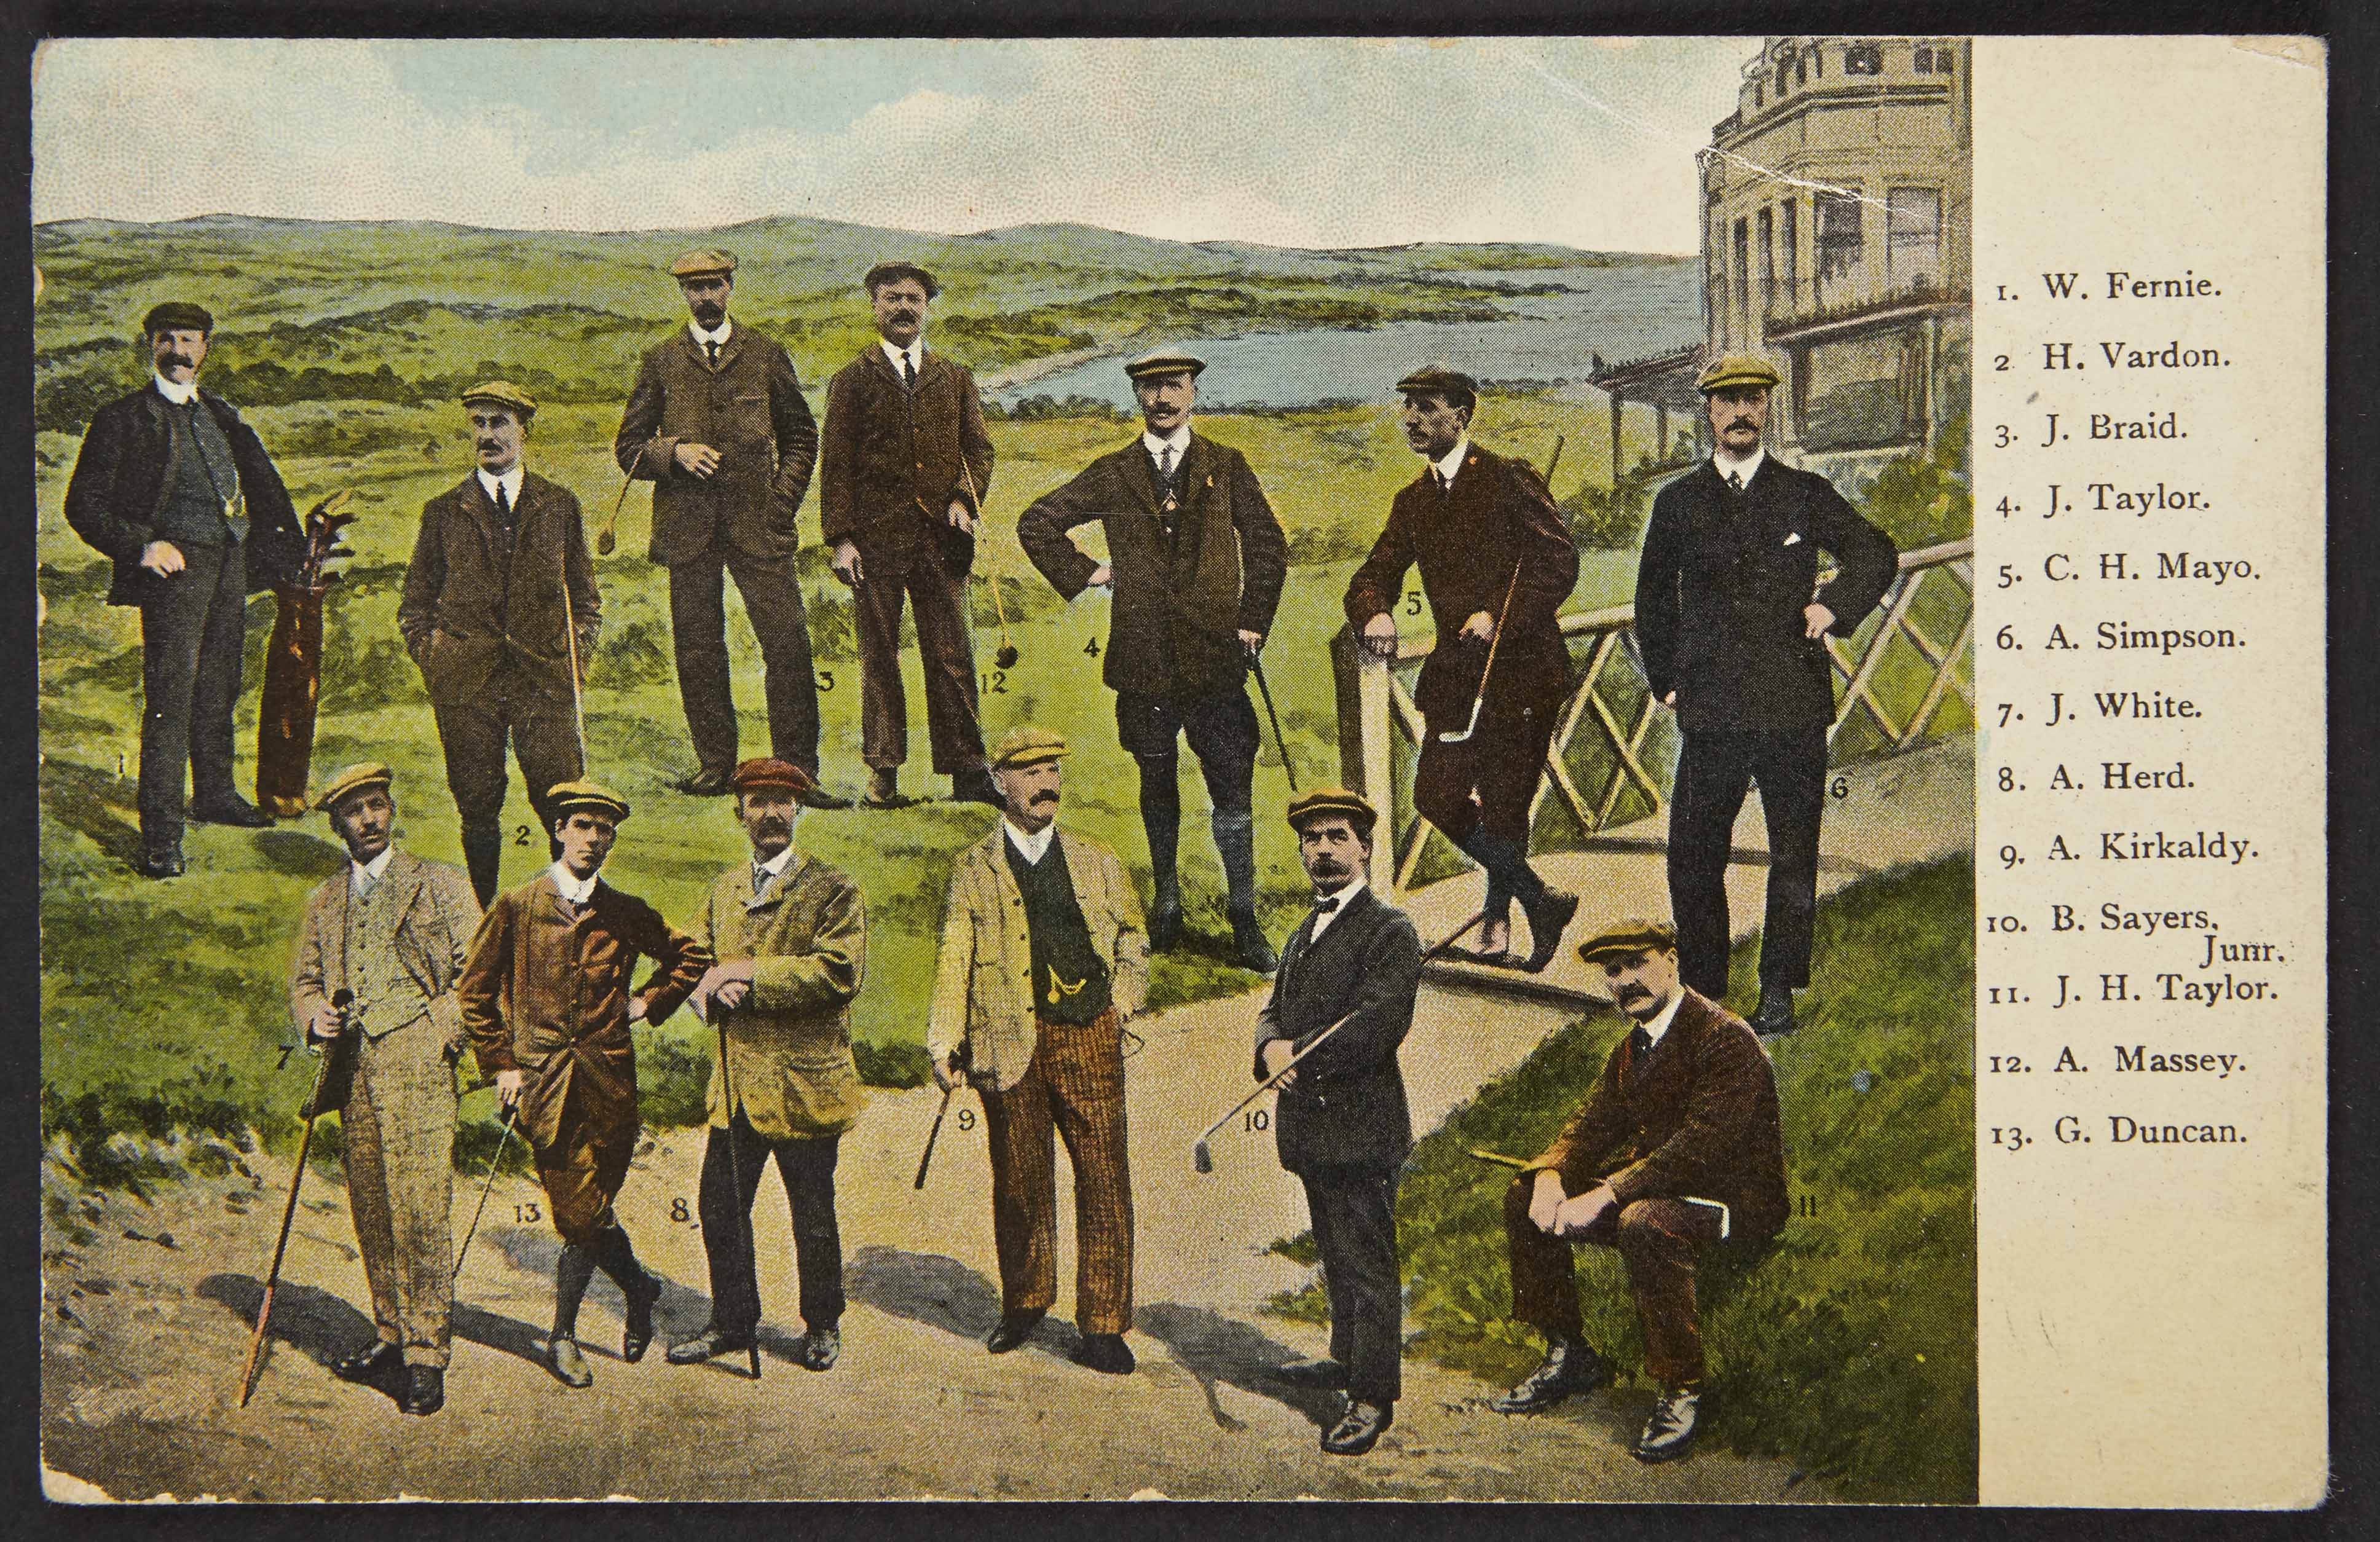 Group of champion golfers at St Andrews coloured golfing postcard – in various poses with the R&A